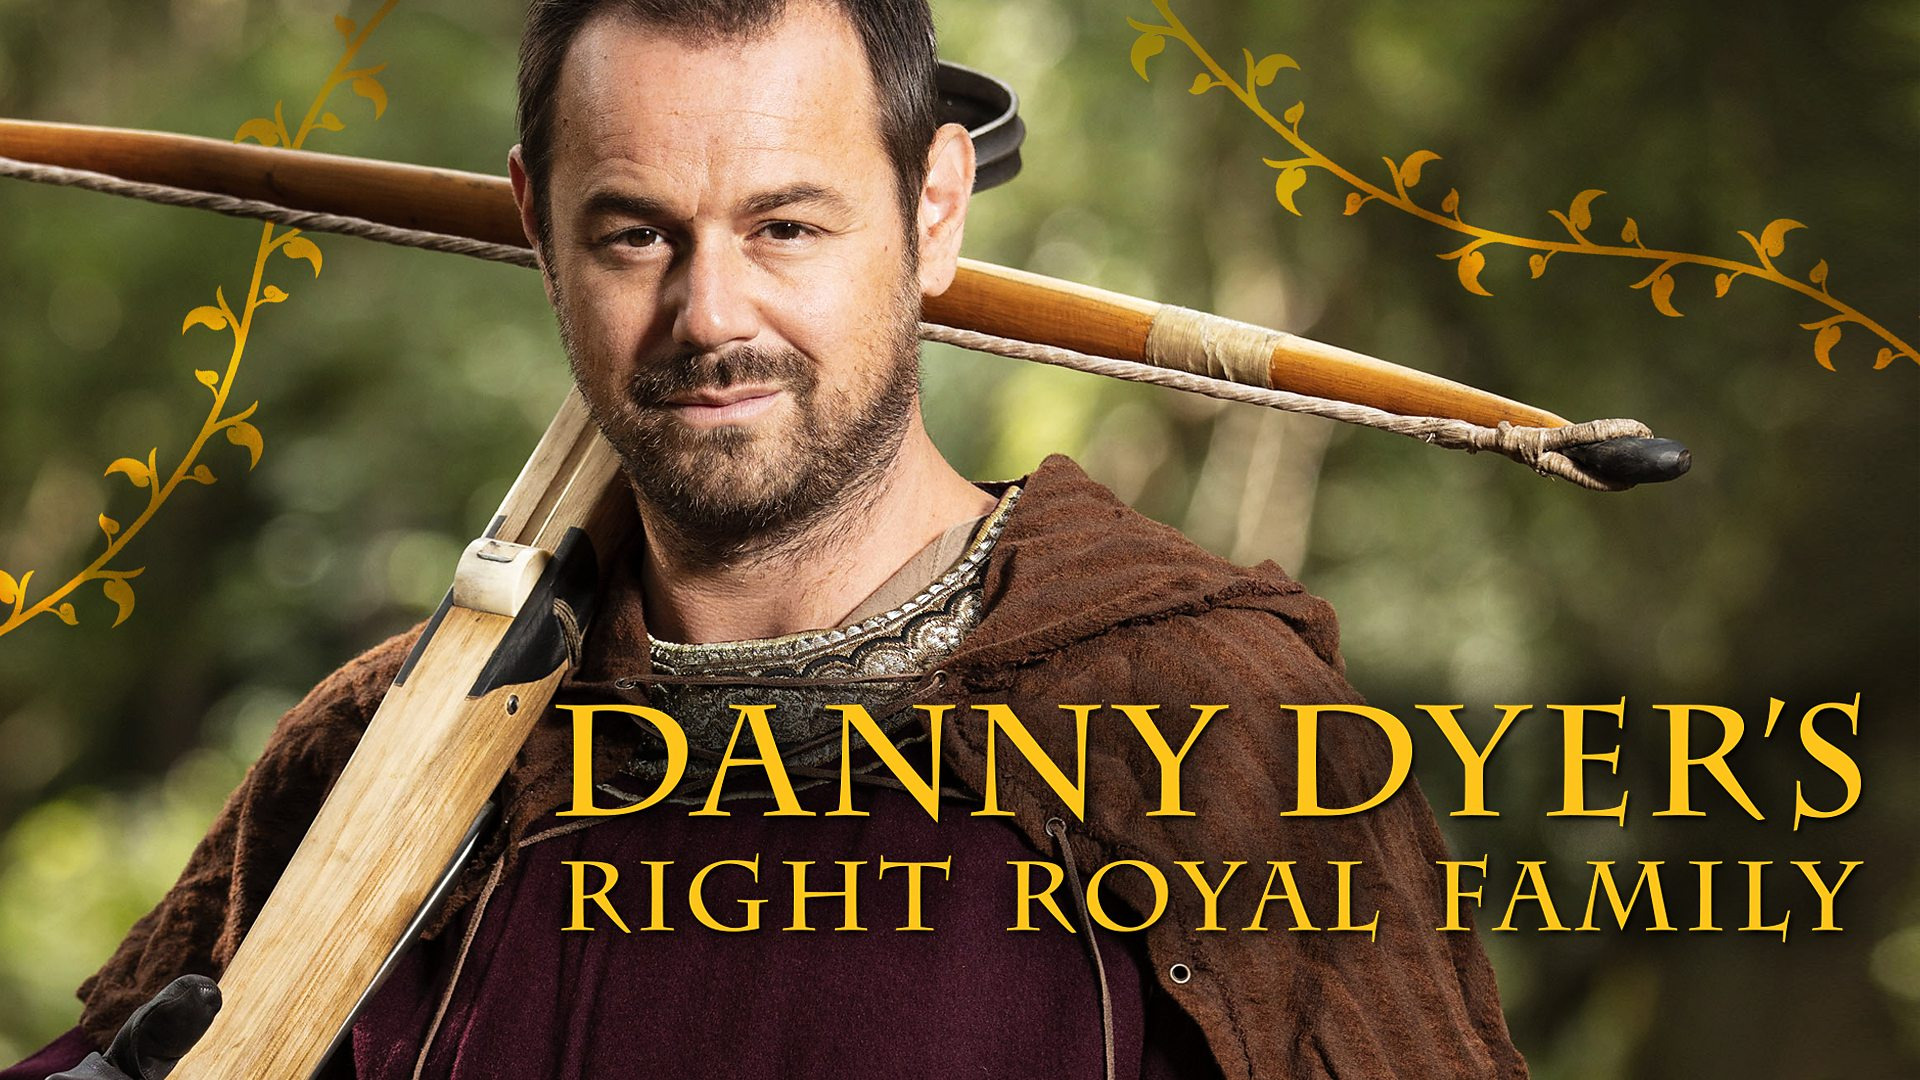 Show Danny Dyer's Right Royal Family